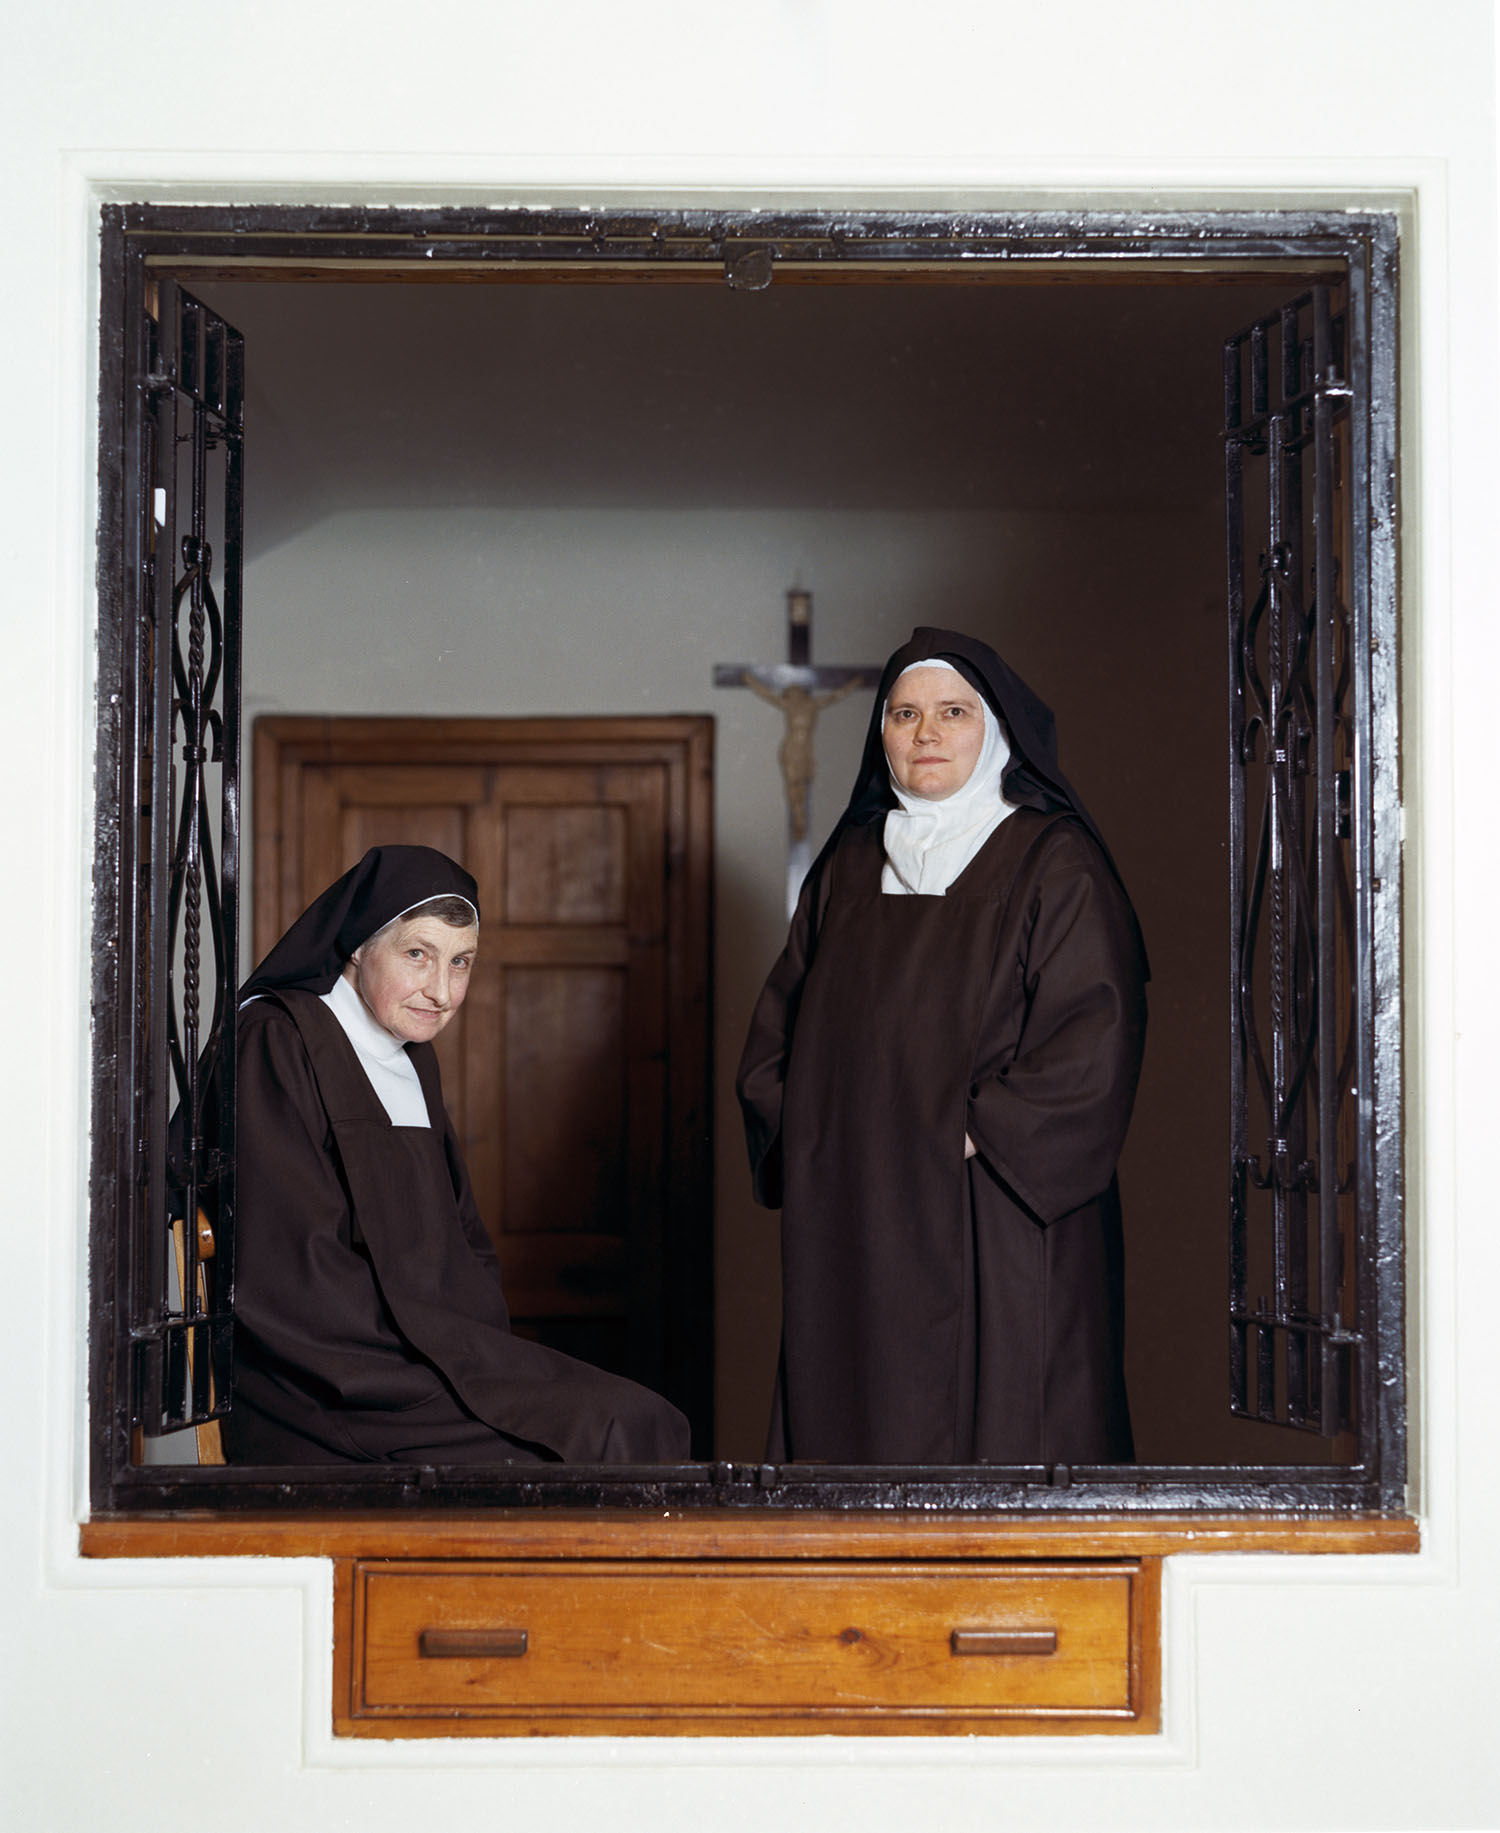  Sister Theresa and friend 